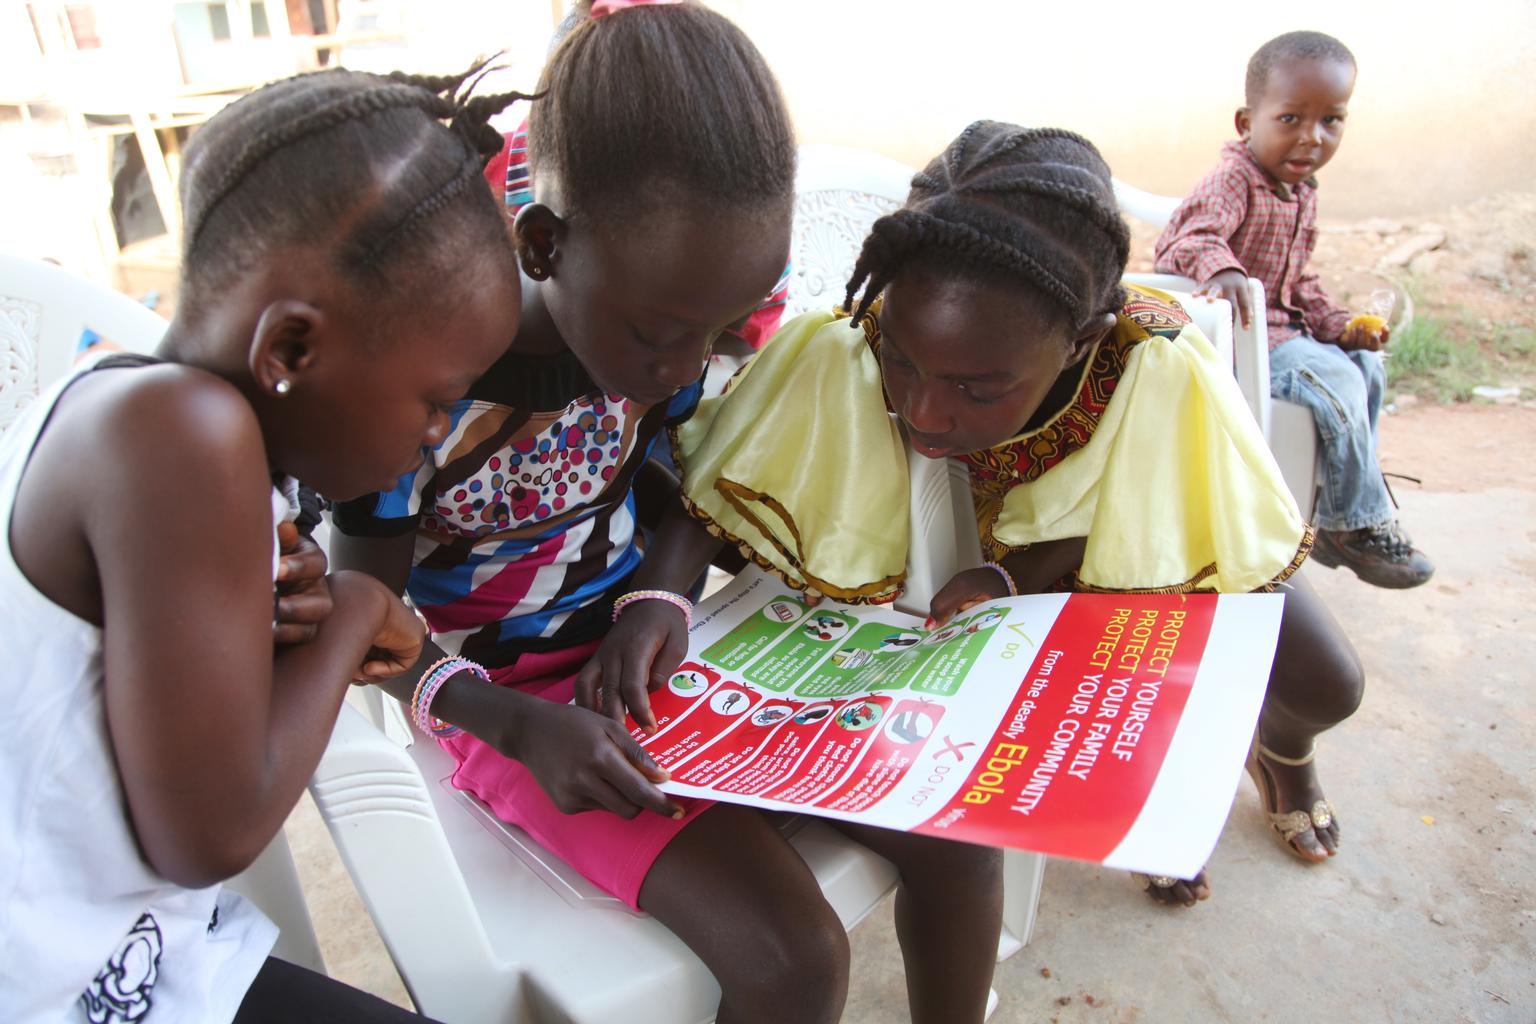 In April 2014 in Liberia, girls look at a poster, distributed by UNICEF, bearing information on and illustrations of best practices that help prevent the spread of Ebola virus disease (EVD), in the city of Voinjama, in Lofa County.